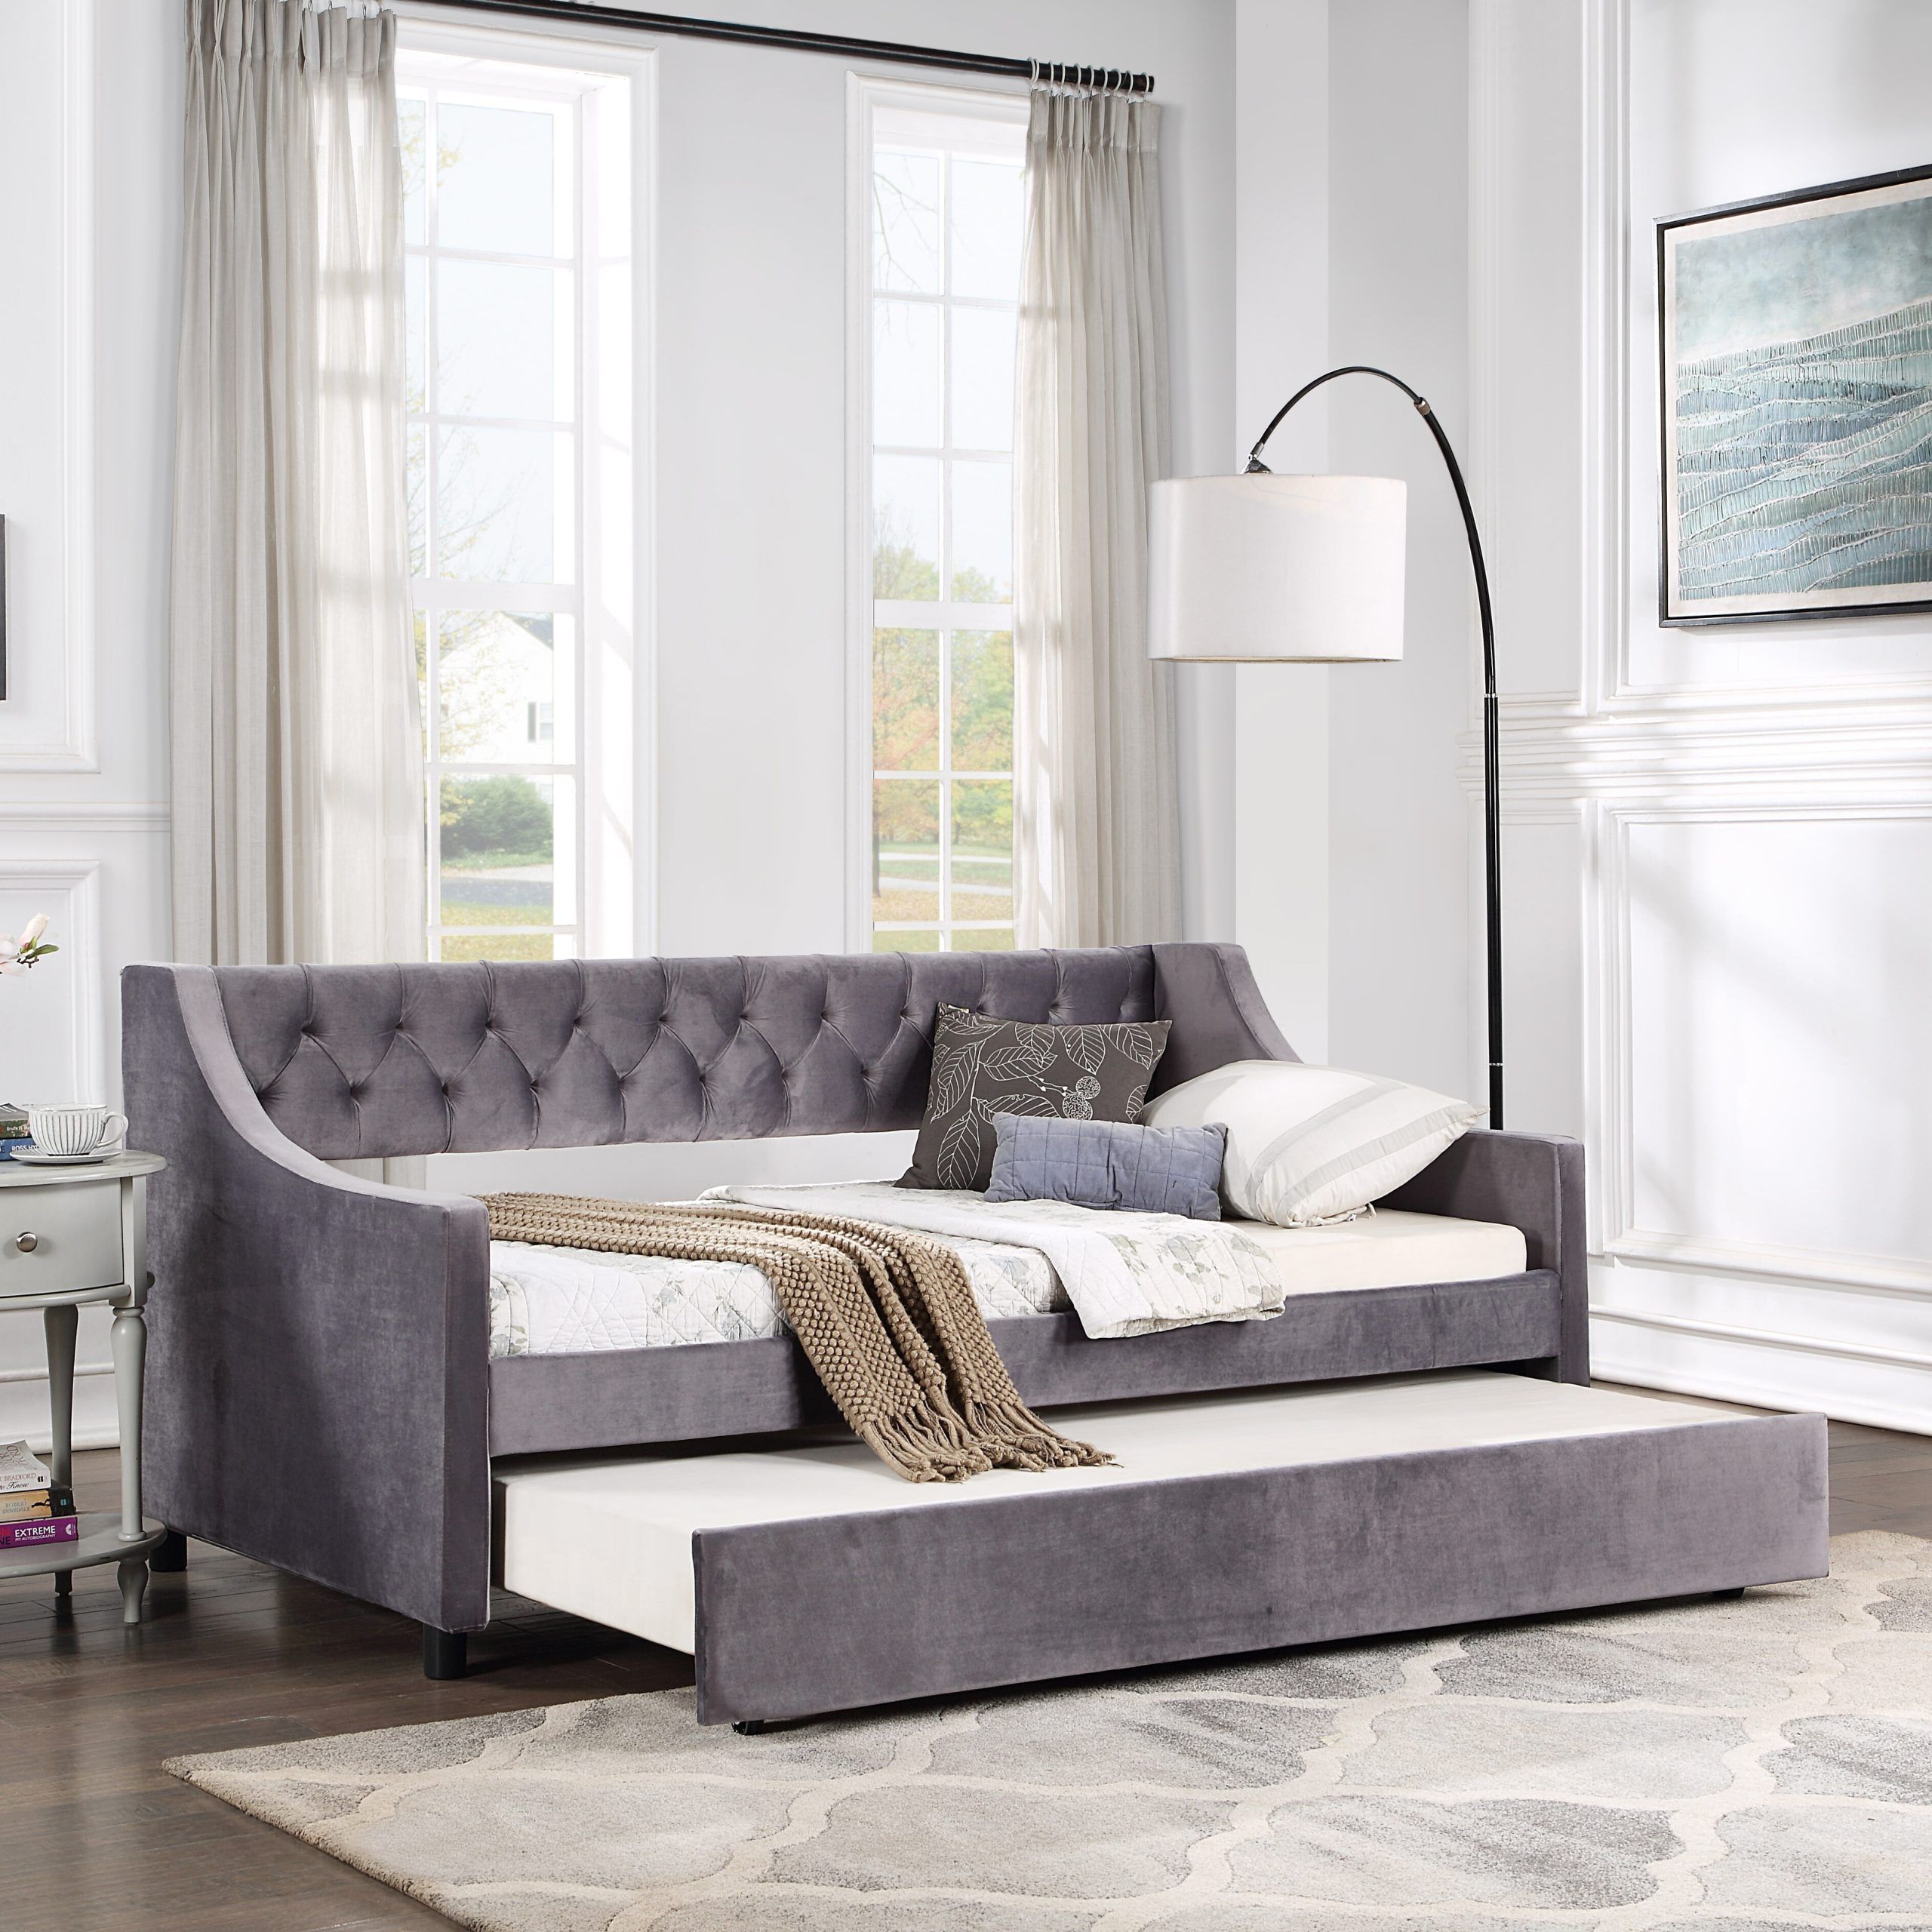 Overdrive Pull Out Sofa Bed With Upholstered Tufted Daybed Sleeper Sofa Intended For 3 In 1 Gray Pull Out Sleeper Sofas (View 9 of 20)